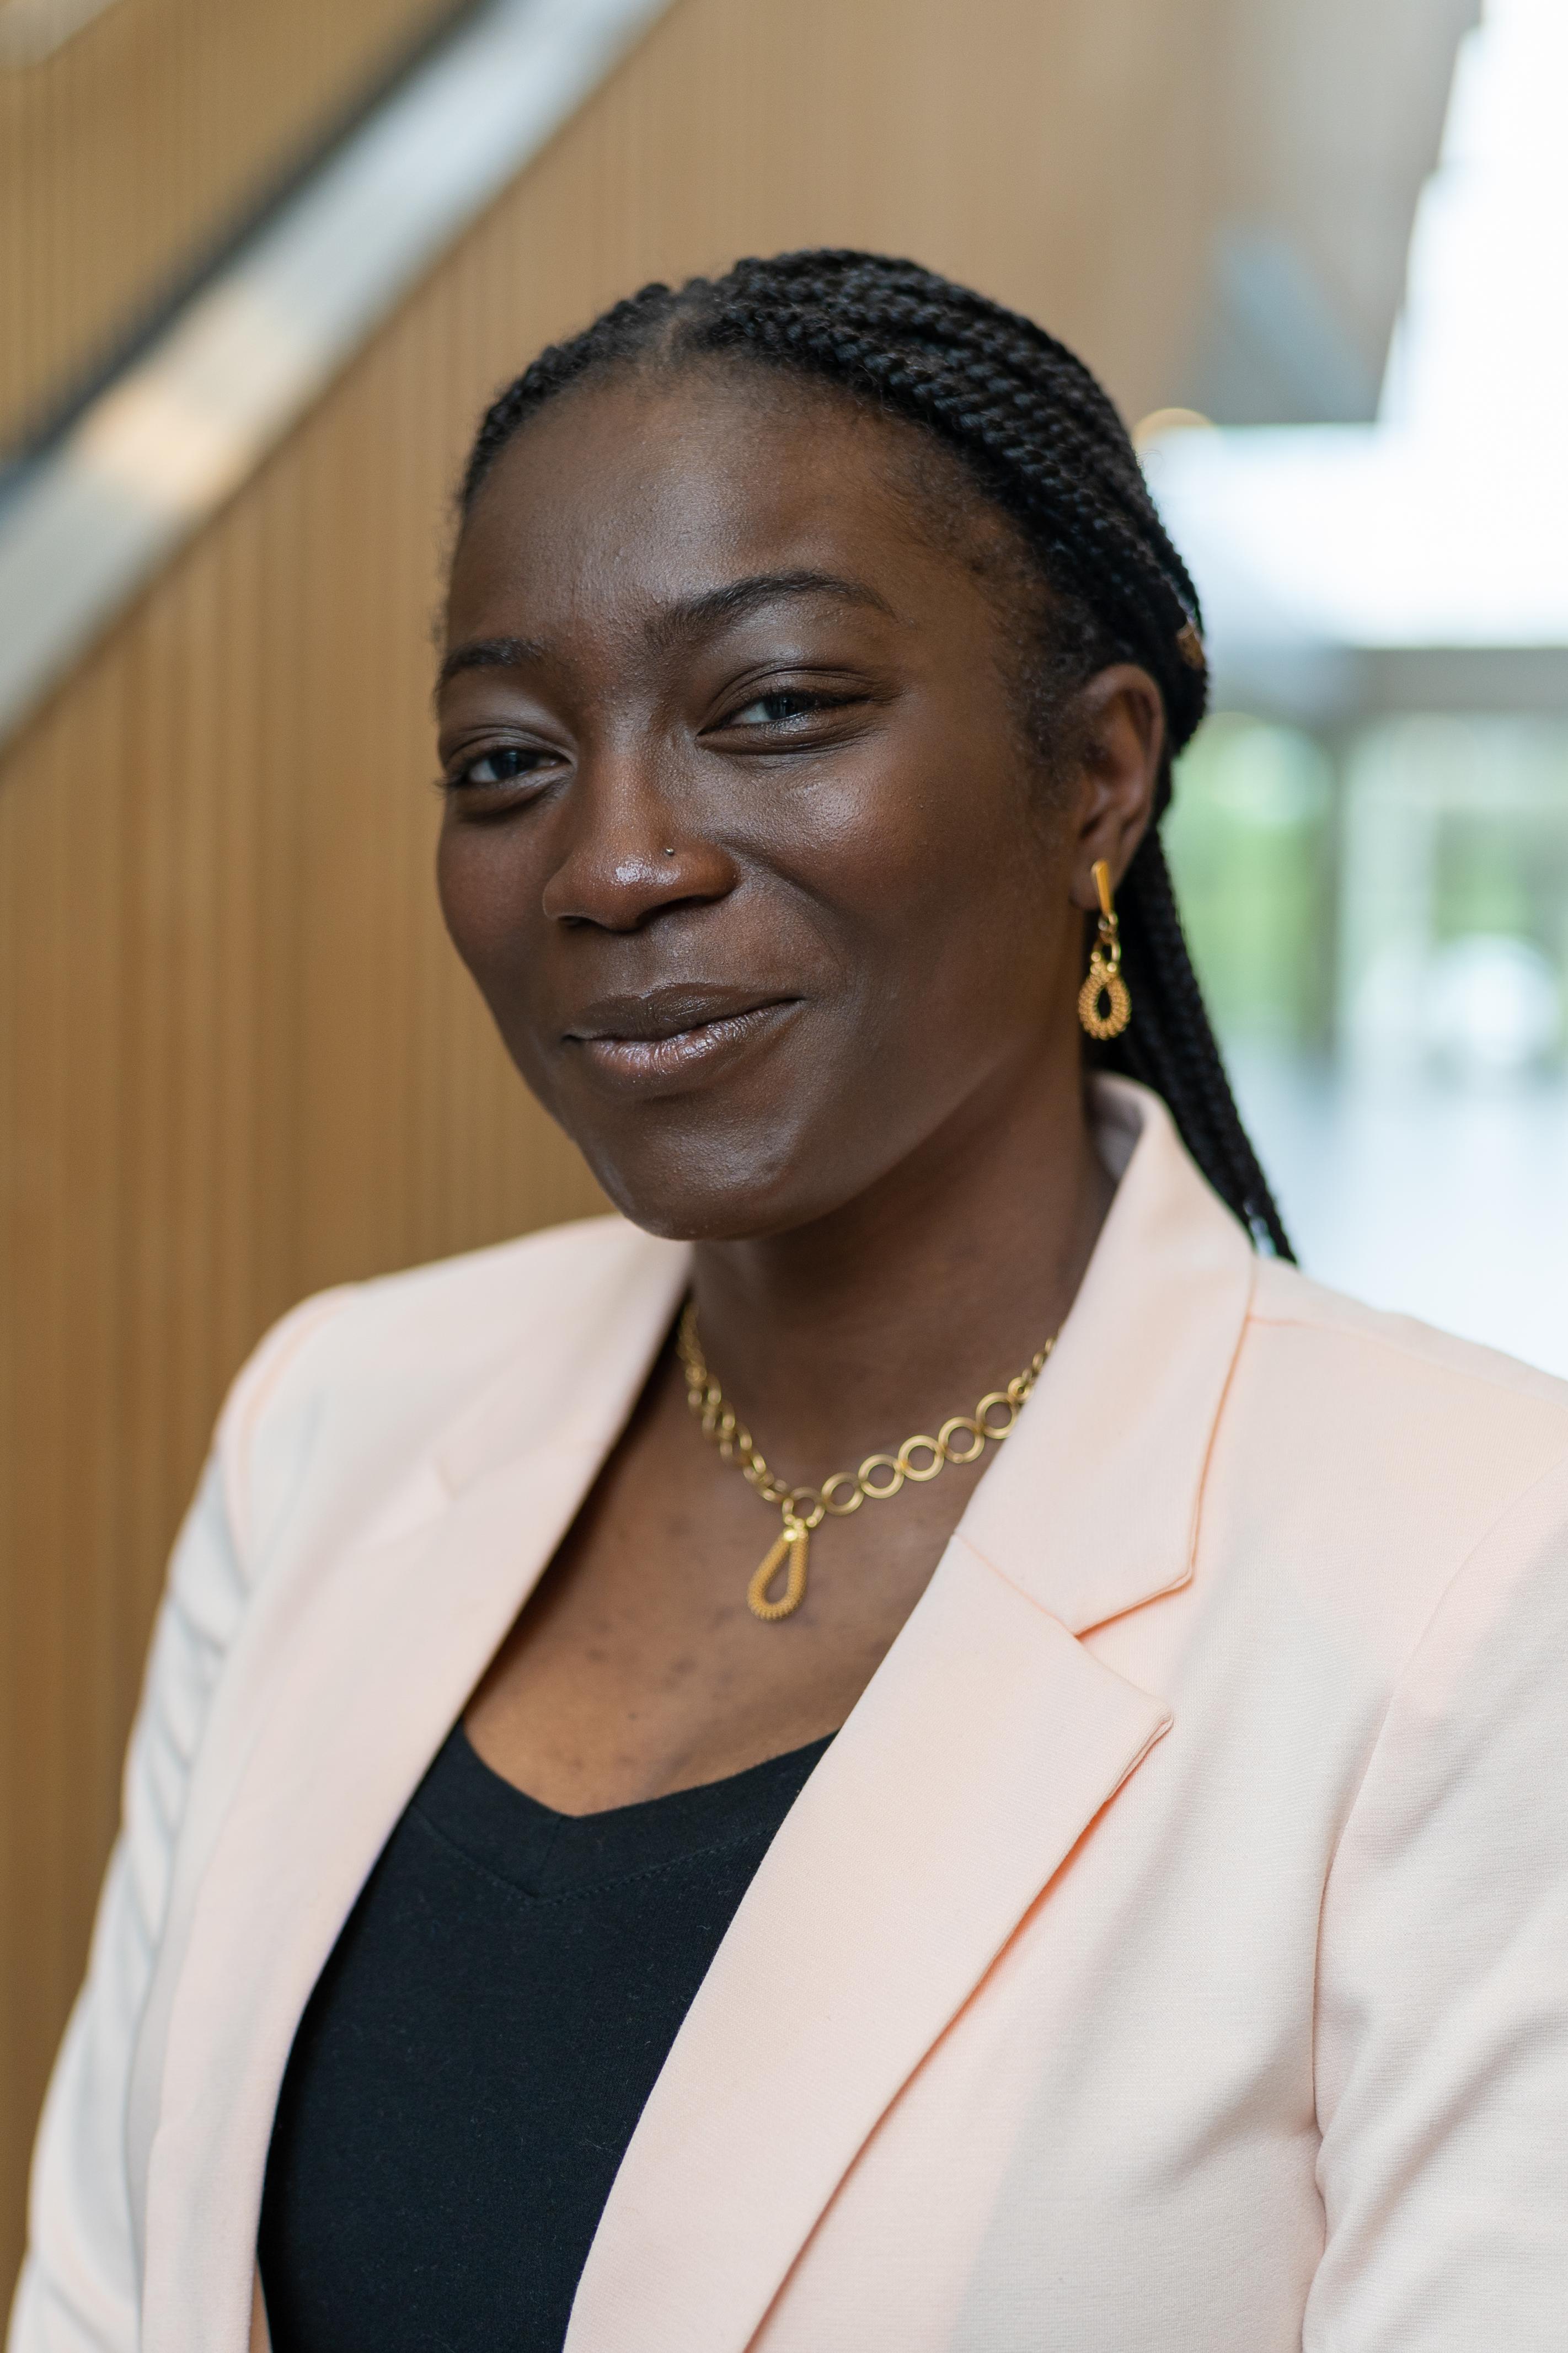 A photo of Efe in Highland Hall, UTSC. She is in a black blouse and a peach-toned blazer.